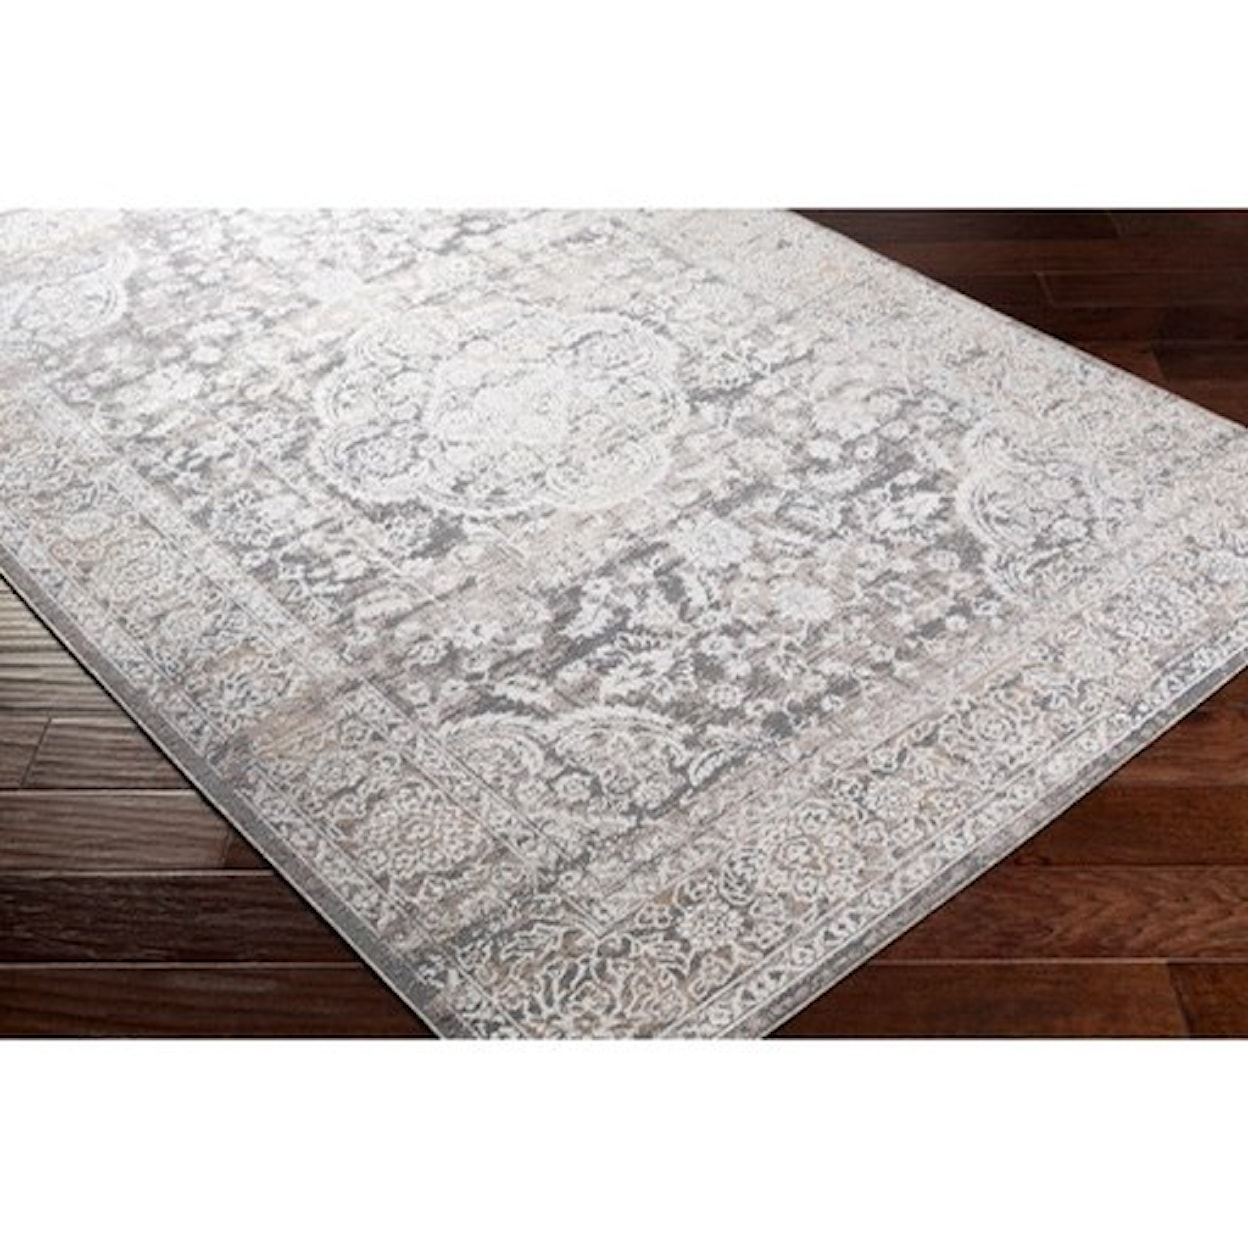 Ruby-Gordon Accents Couture 7'10" x 10'3" Rug